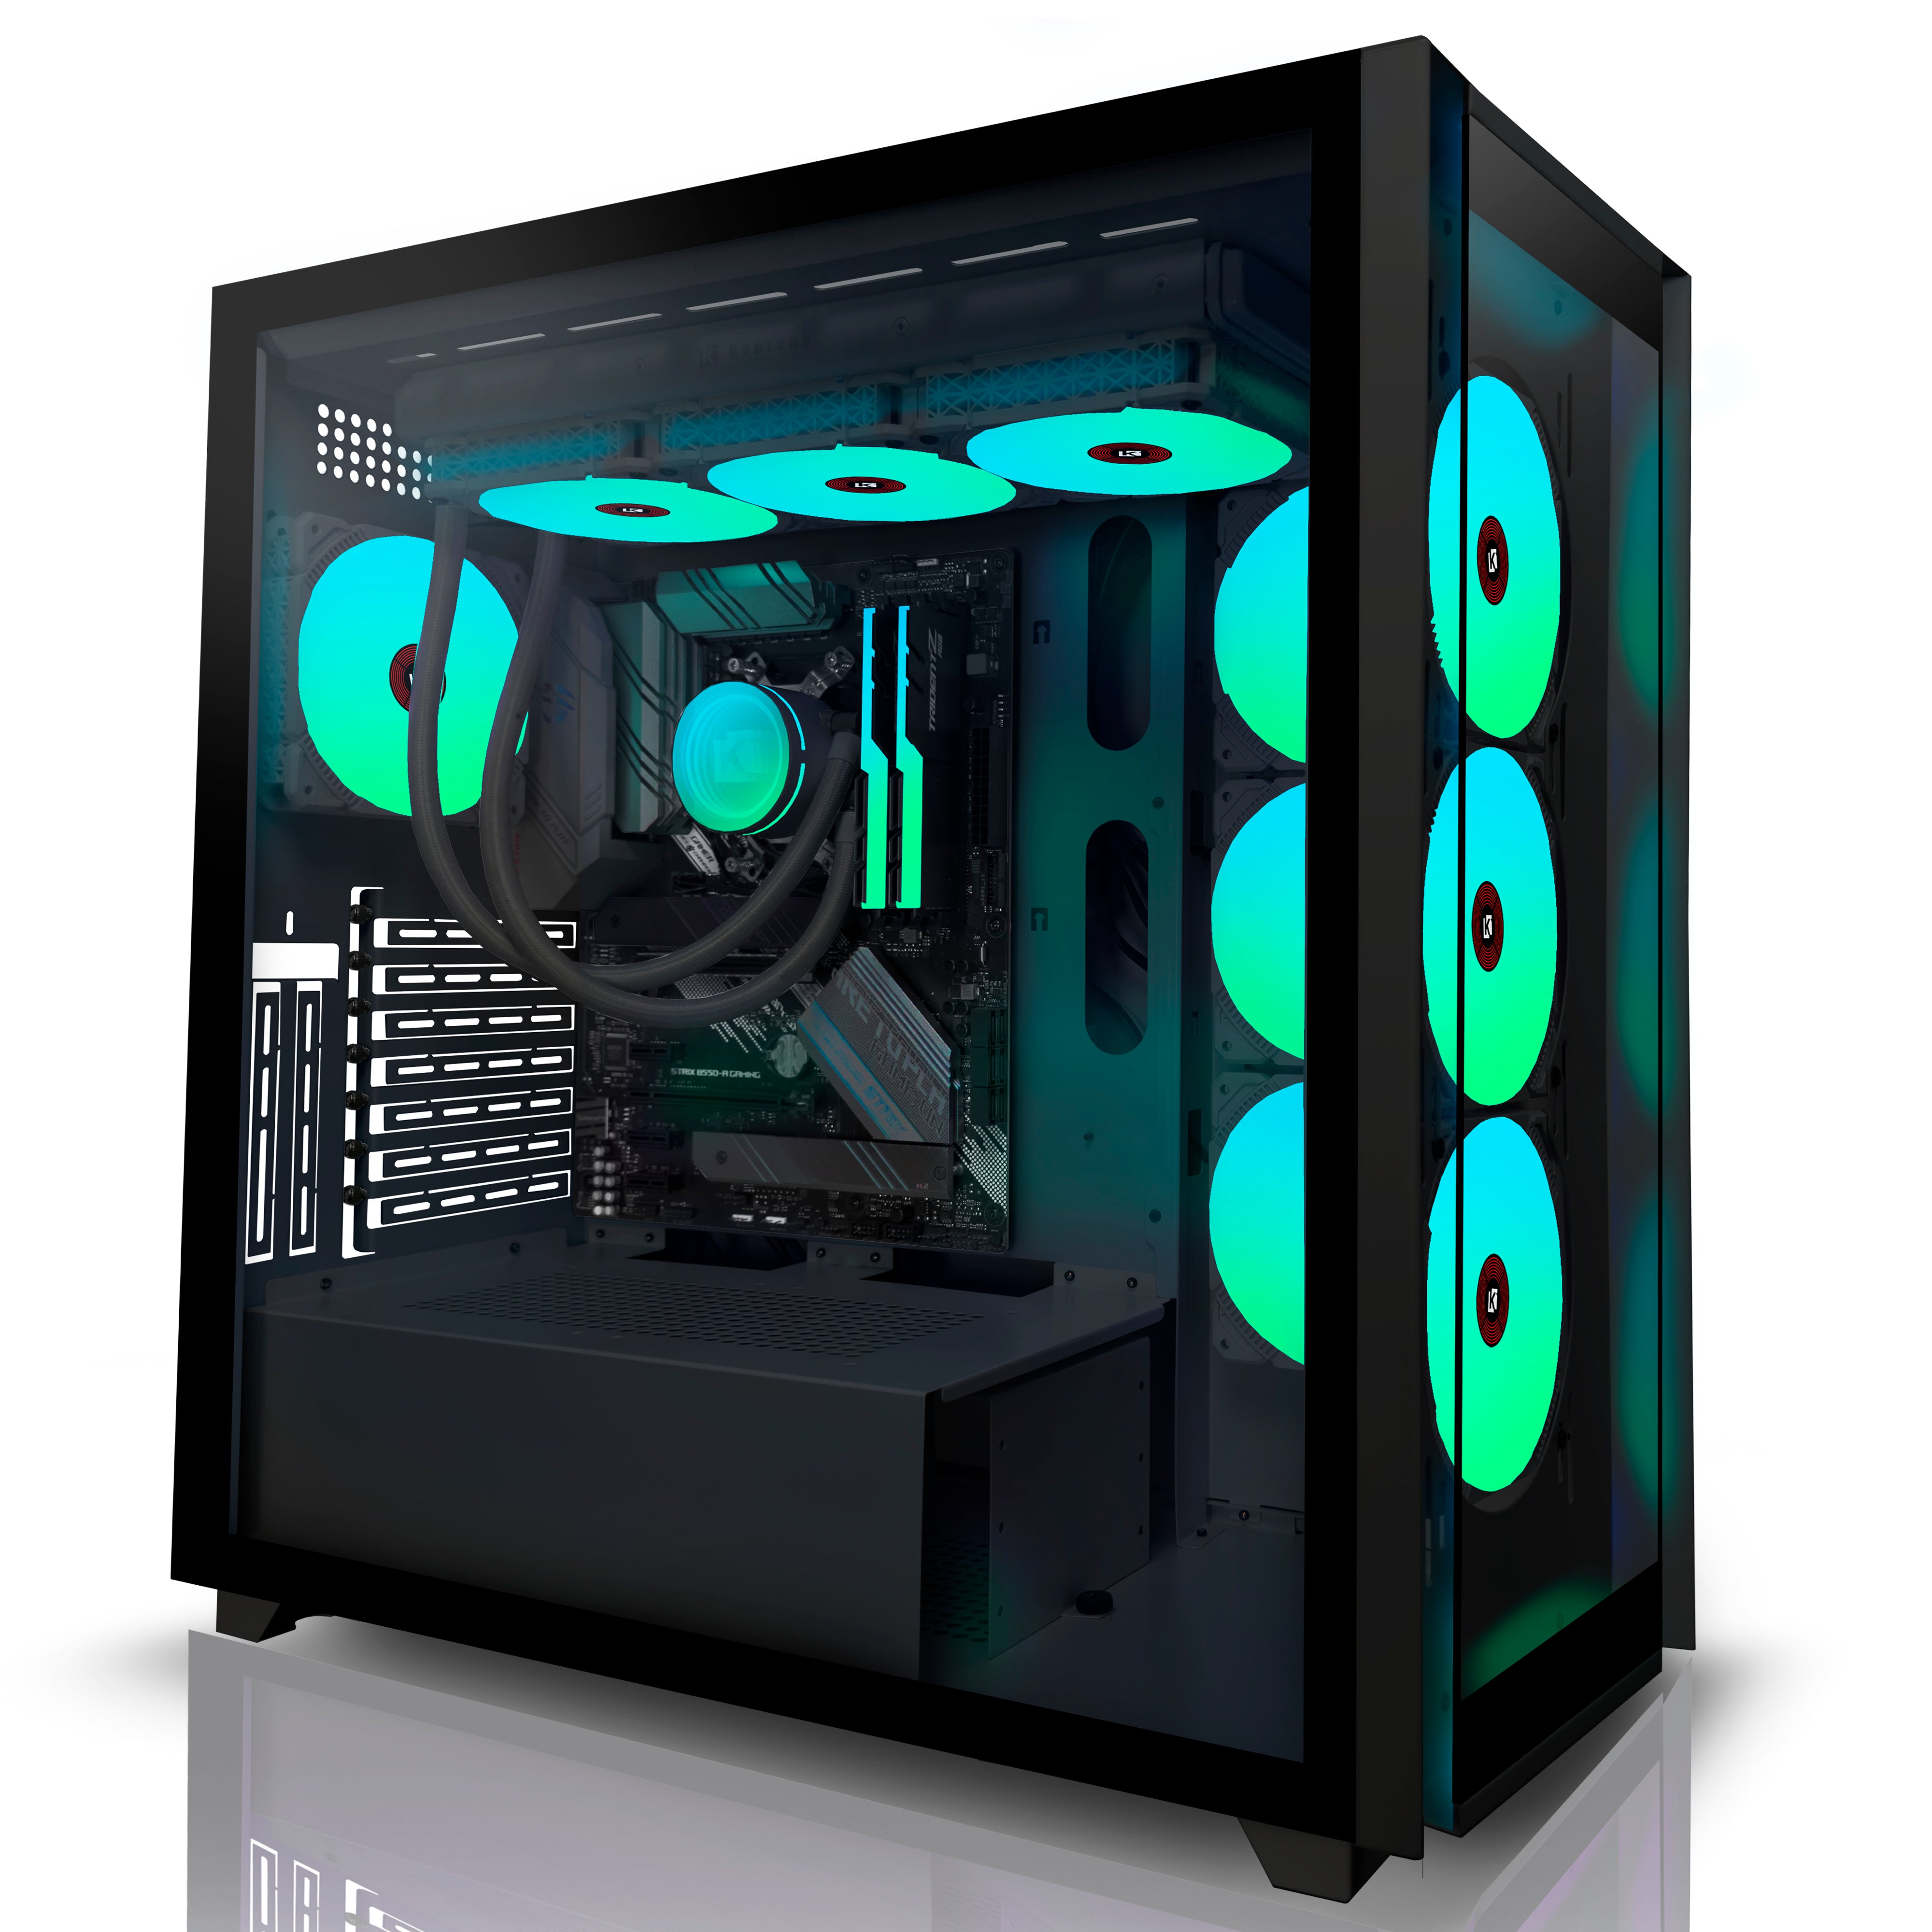  KEDIERS PC CASE ATX 4 PWM ARGB Fans Pre-Installed, Mid Tower  Computer Case with Full View Dual Tempered Glass, Gaming PC Case,Black,G900